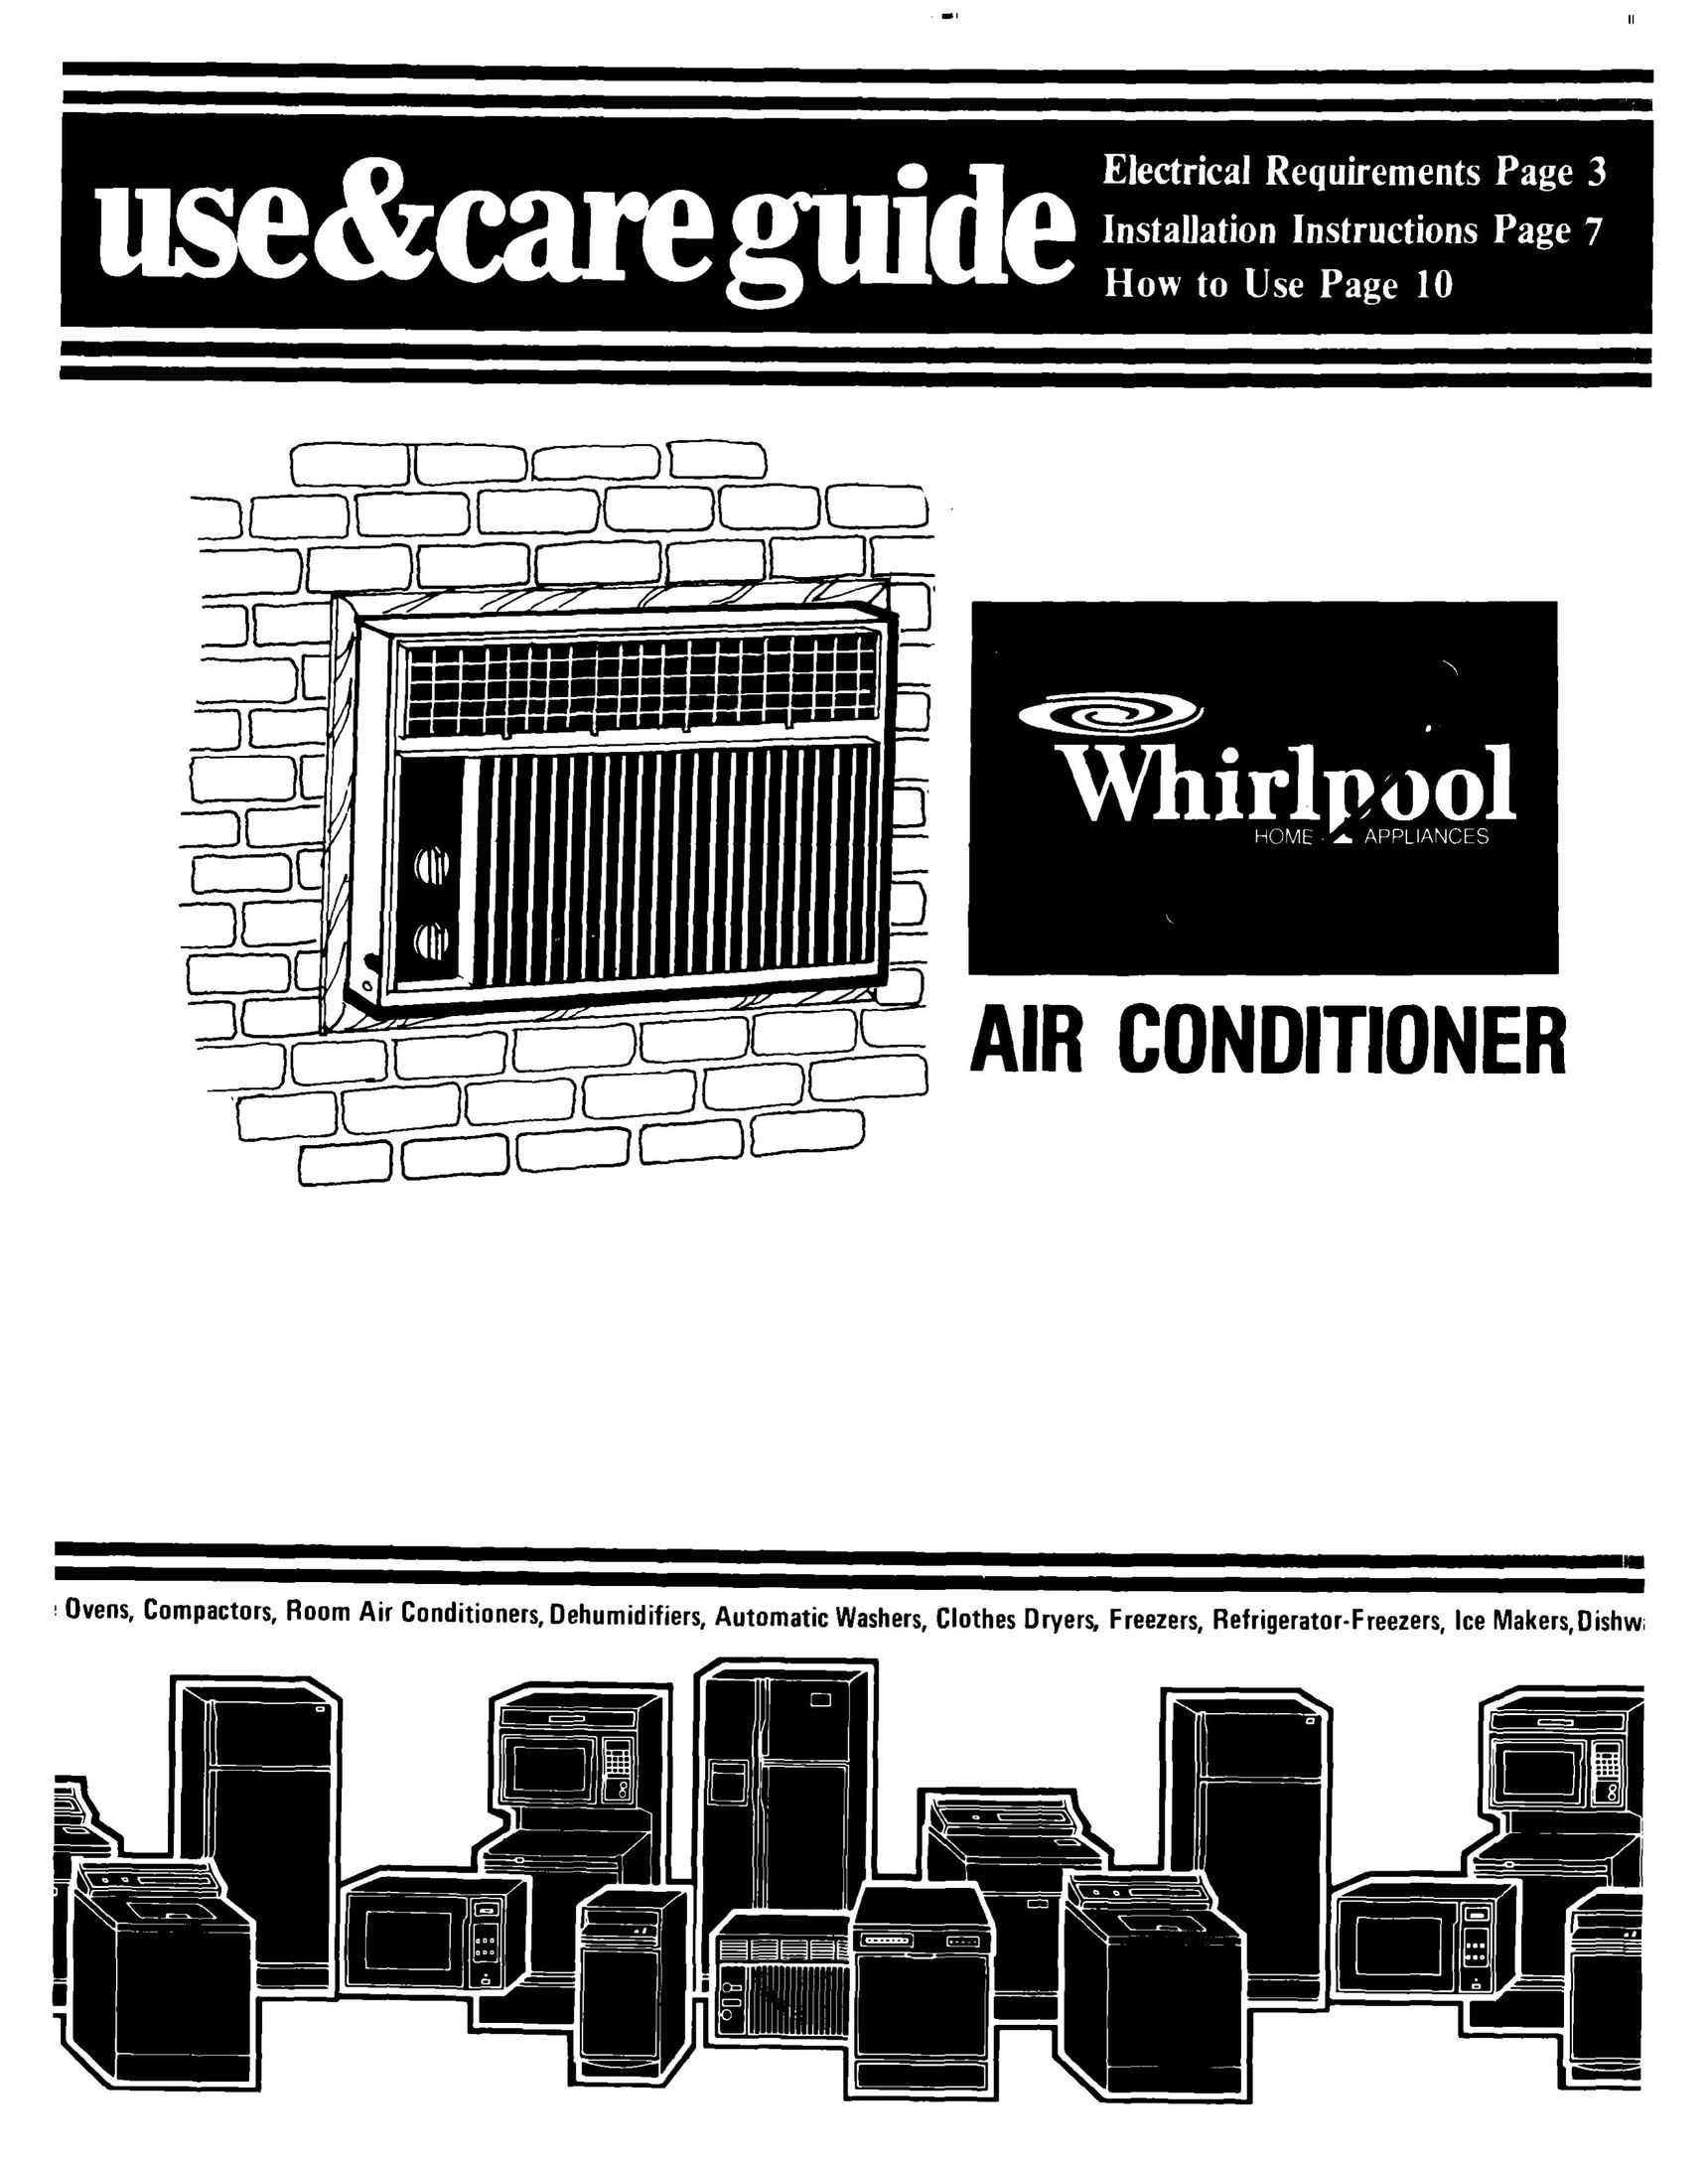 Whirlpool ACE184XM0 Air Conditioner User Manual